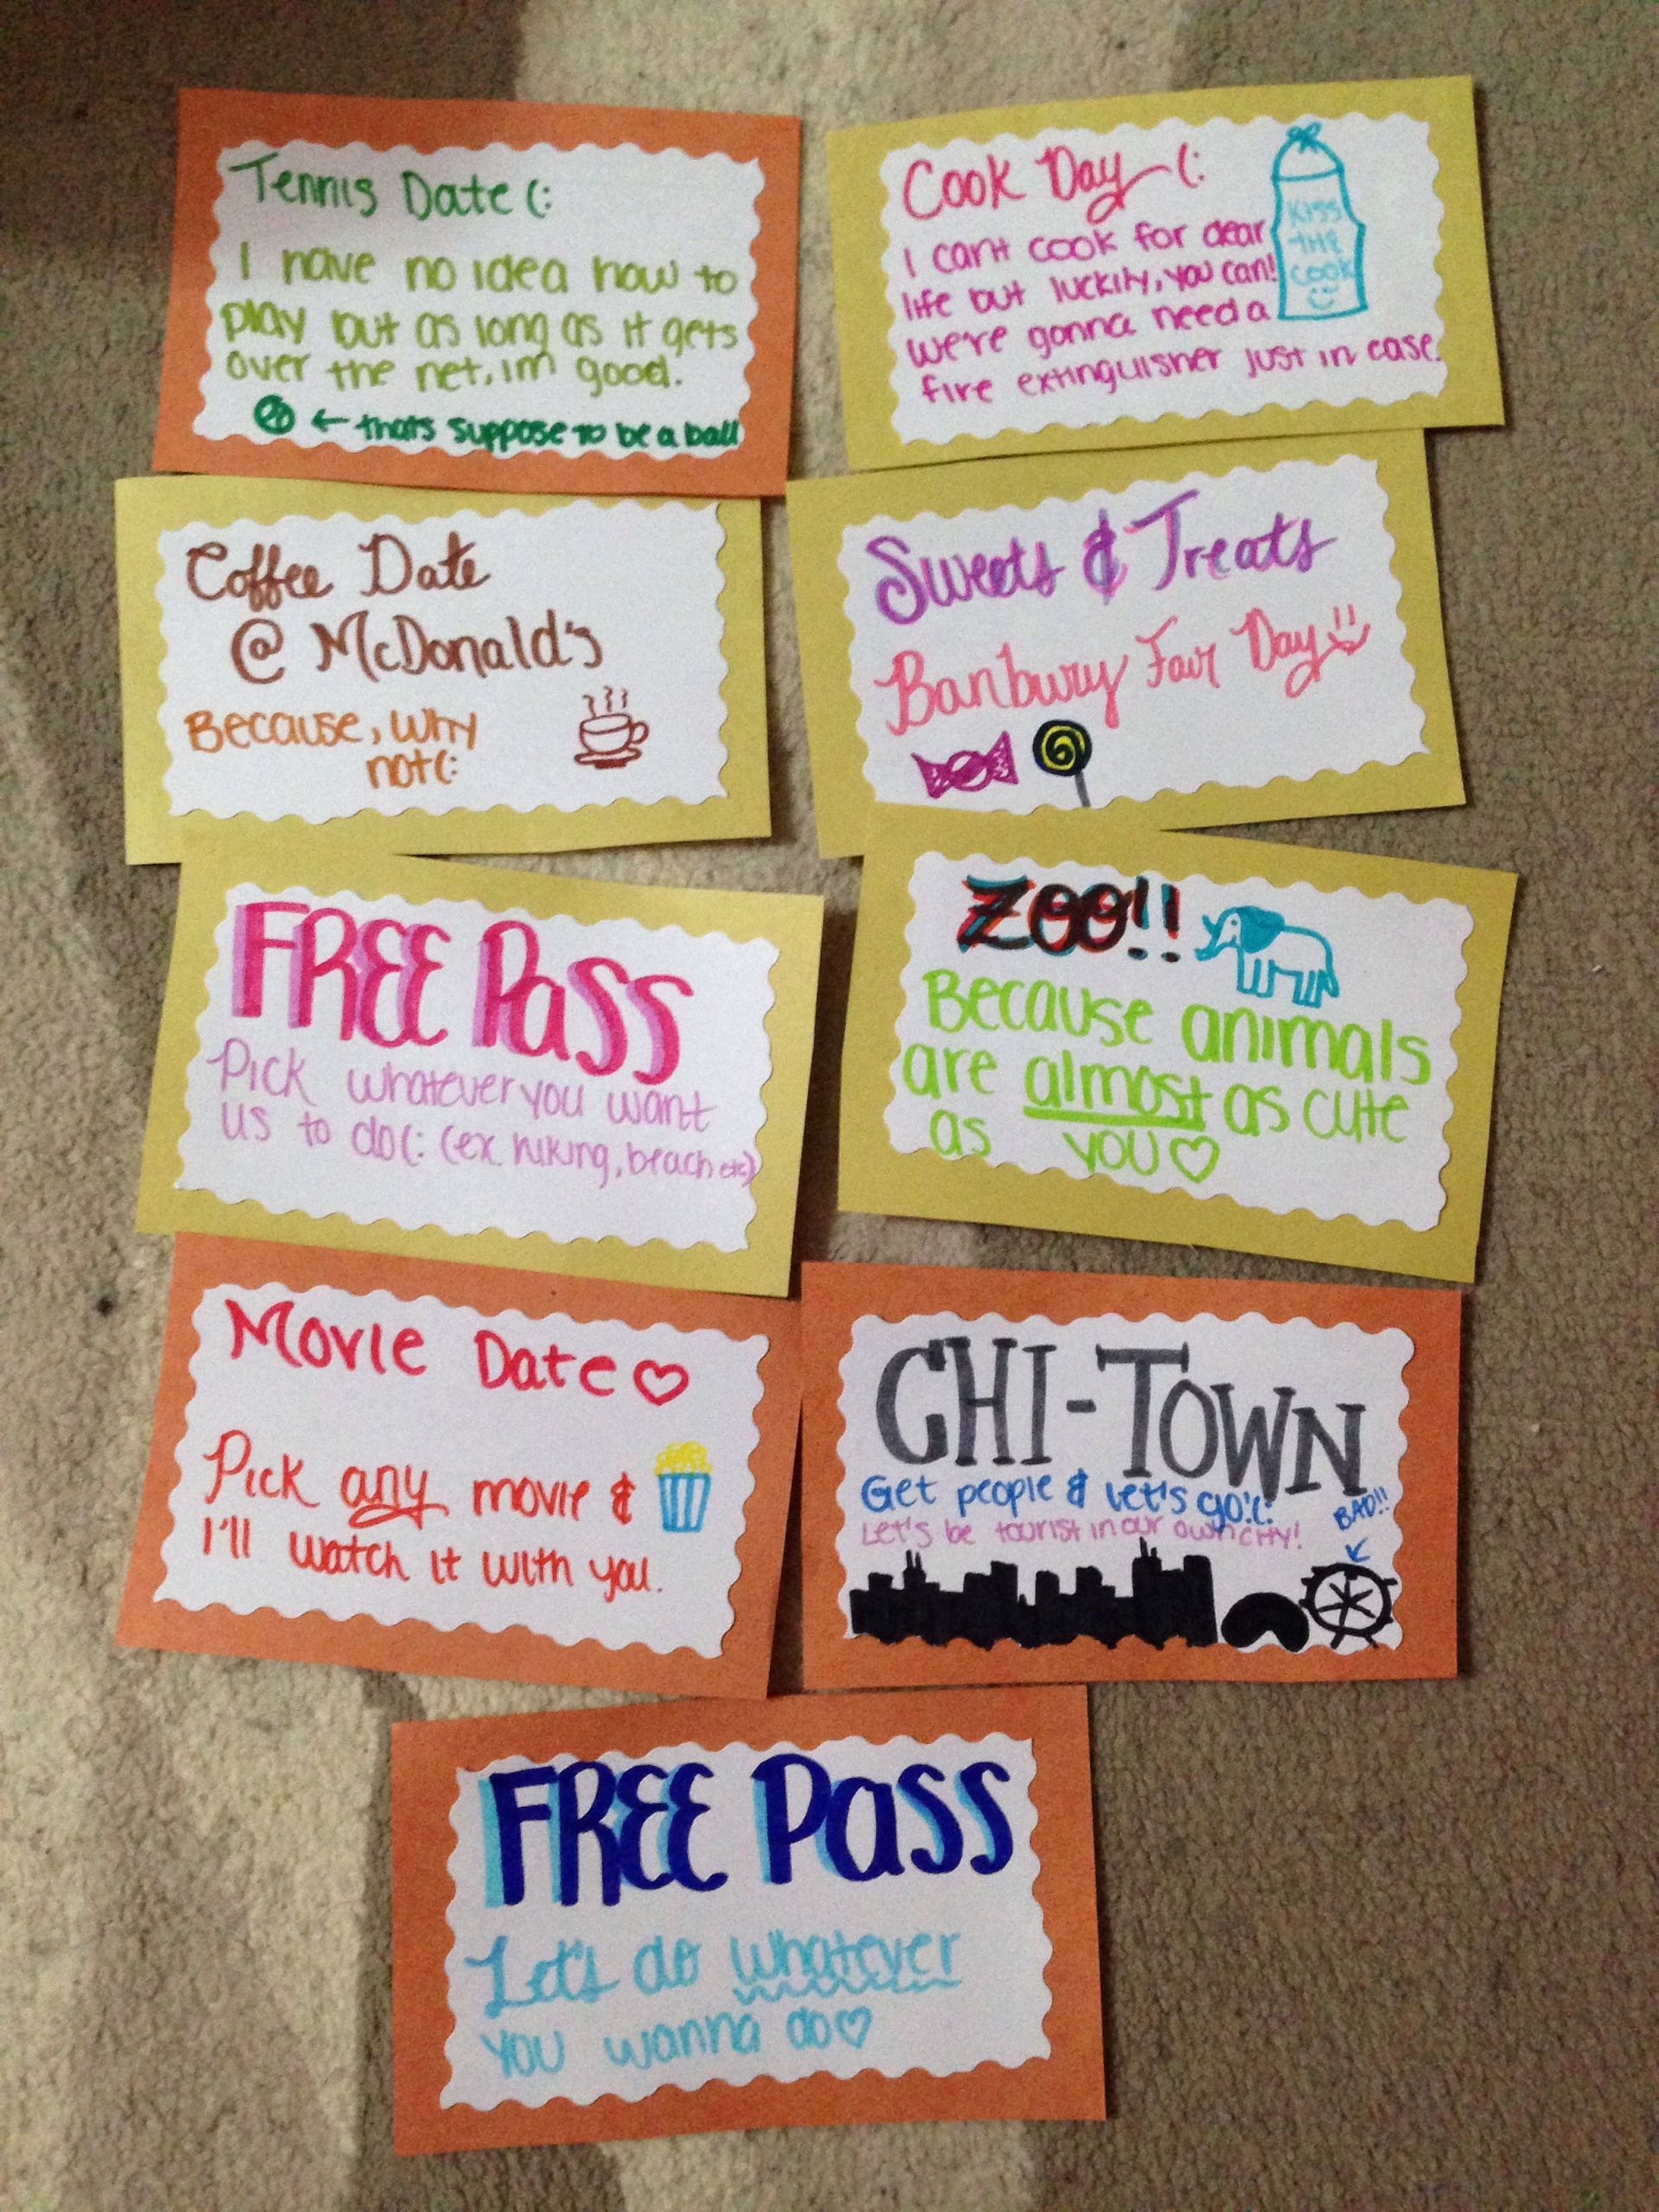 Cute Valentines Day Ideas For Your Boyfriend
 Date passes for your boyfriend